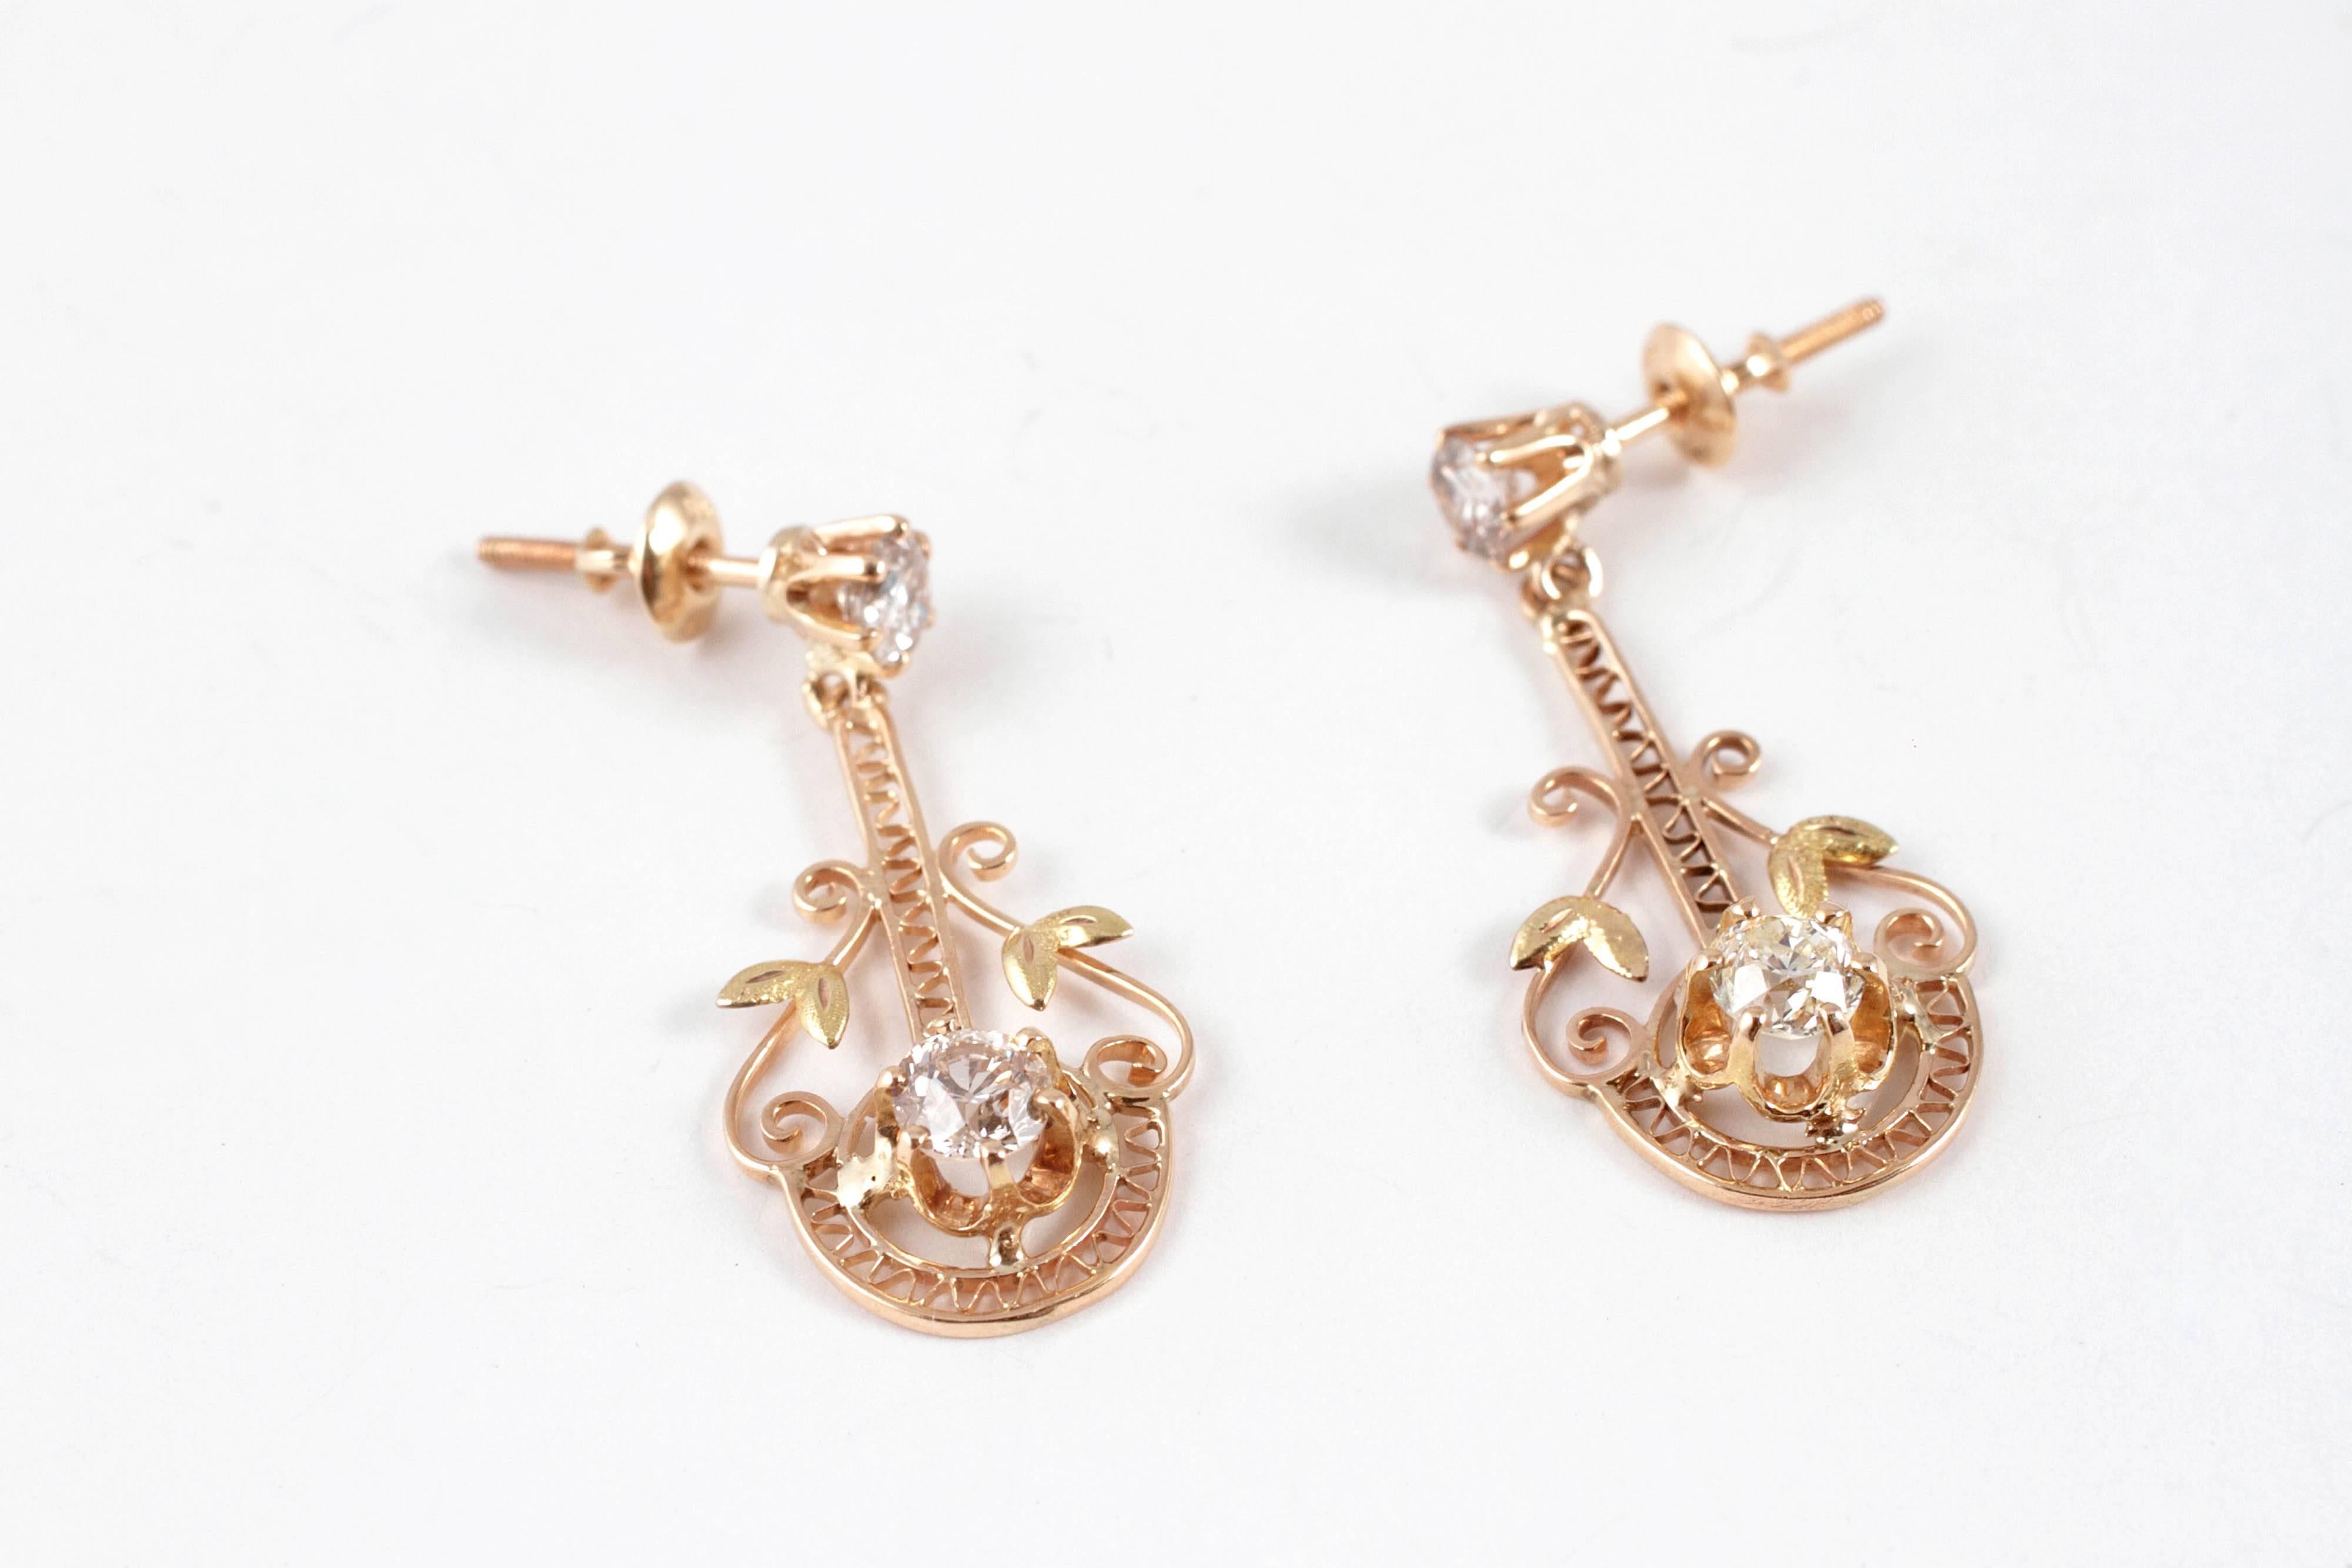 Composed of 10 and 14 karat yellow gold, with 1.50 carats of diamonds and secured with a thread back. These are lovely on!